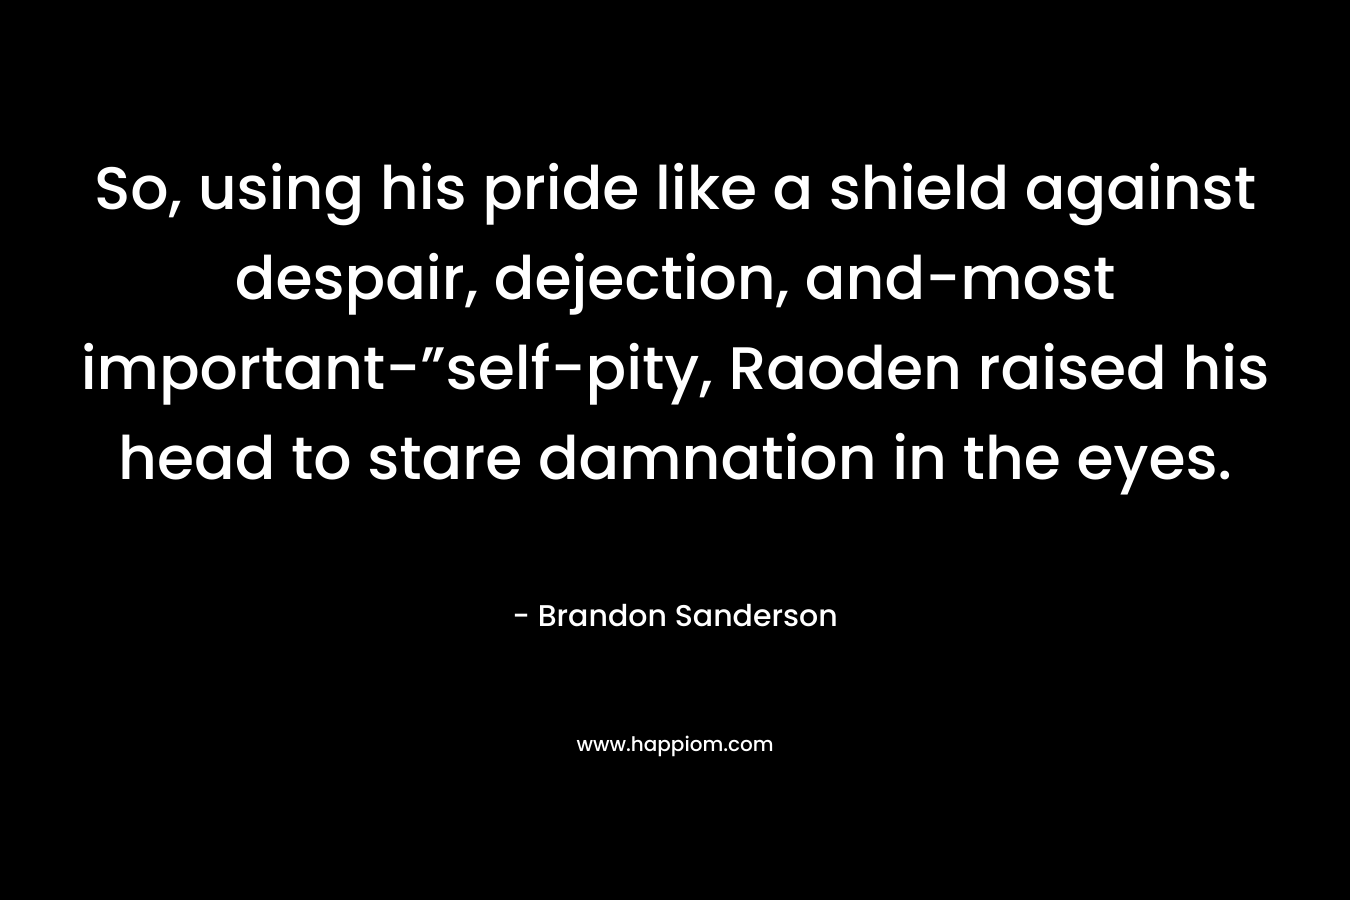 So, using his pride like a shield against despair, dejection, and-most important-”self-pity, Raoden raised his head to stare damnation in the eyes. – Brandon Sanderson